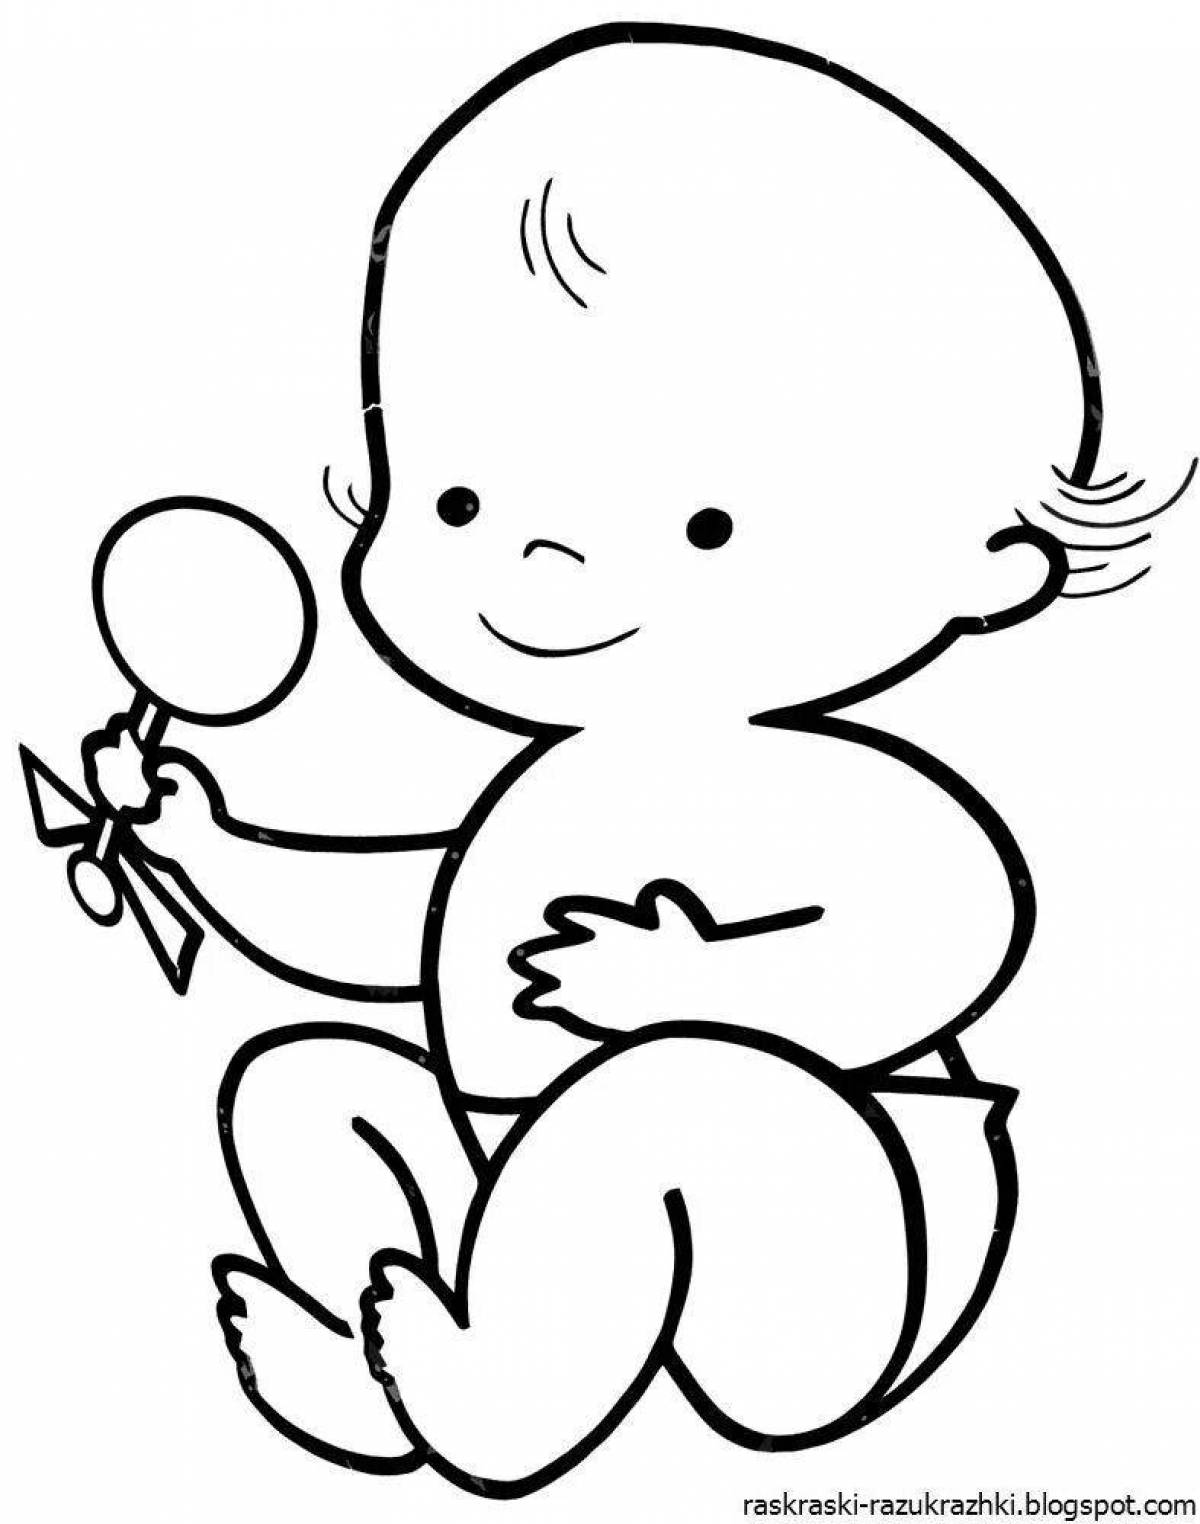 Color-frenzy coloring page for children baby